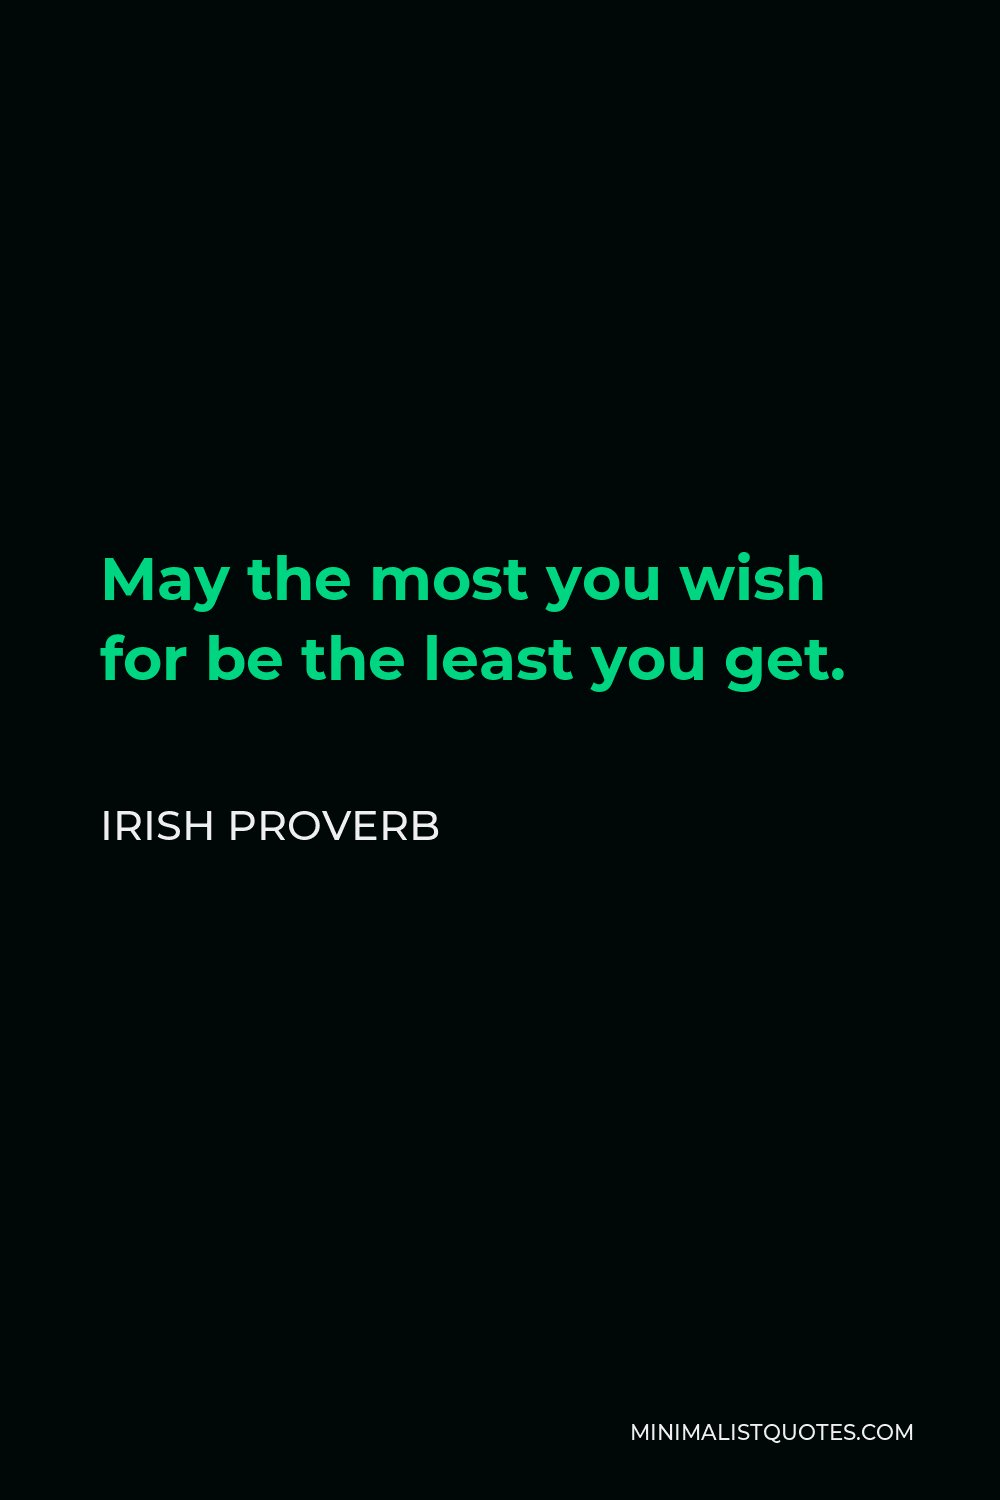 Irish Proverb Quote - May the most you wish for be the least you get.